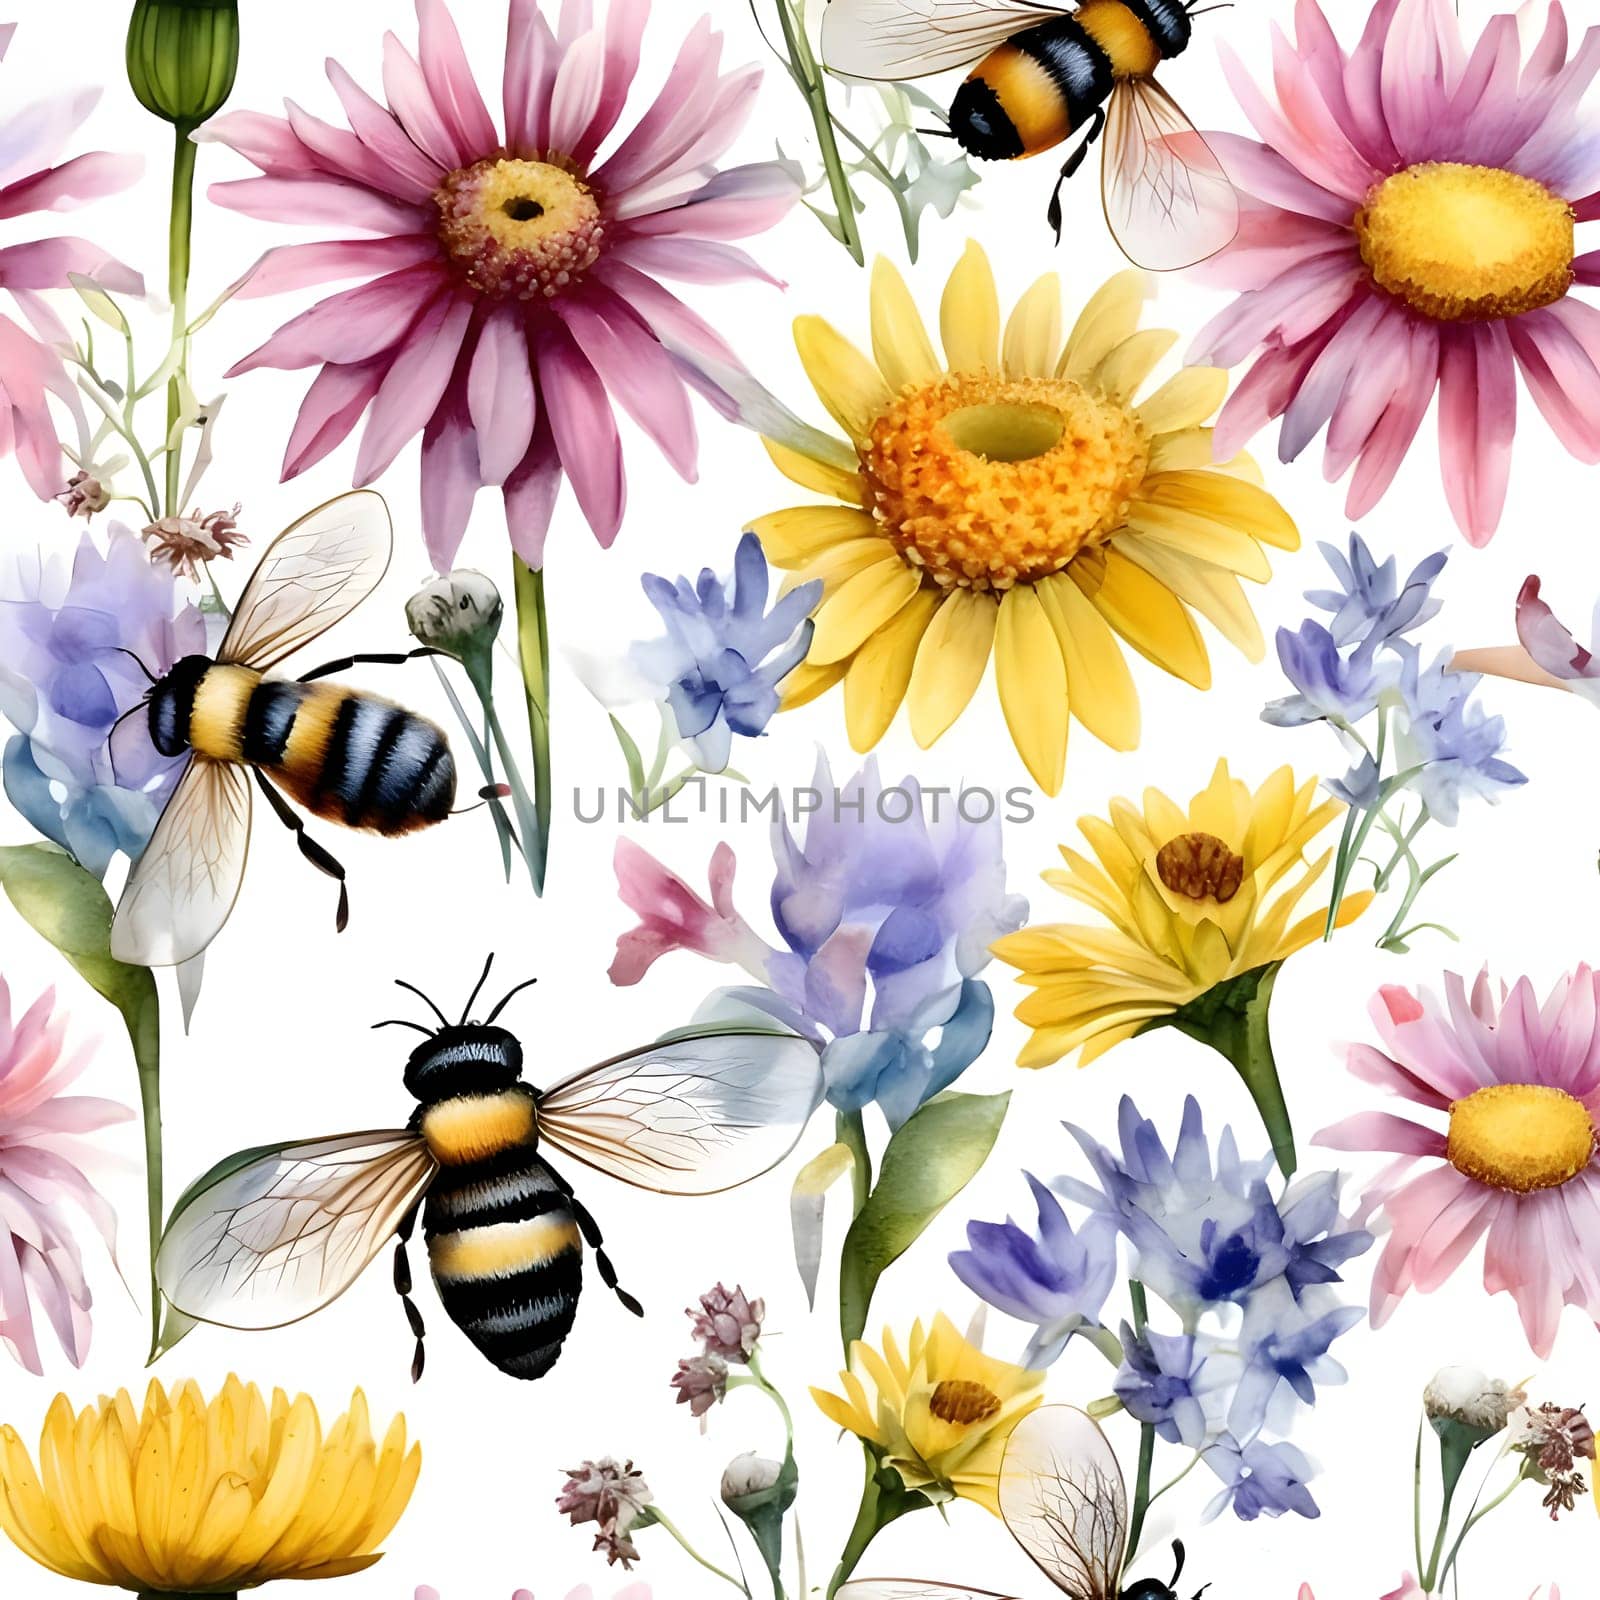 Patterns and banners backgrounds: Seamless pattern with bees and flowers, watercolor illustration.